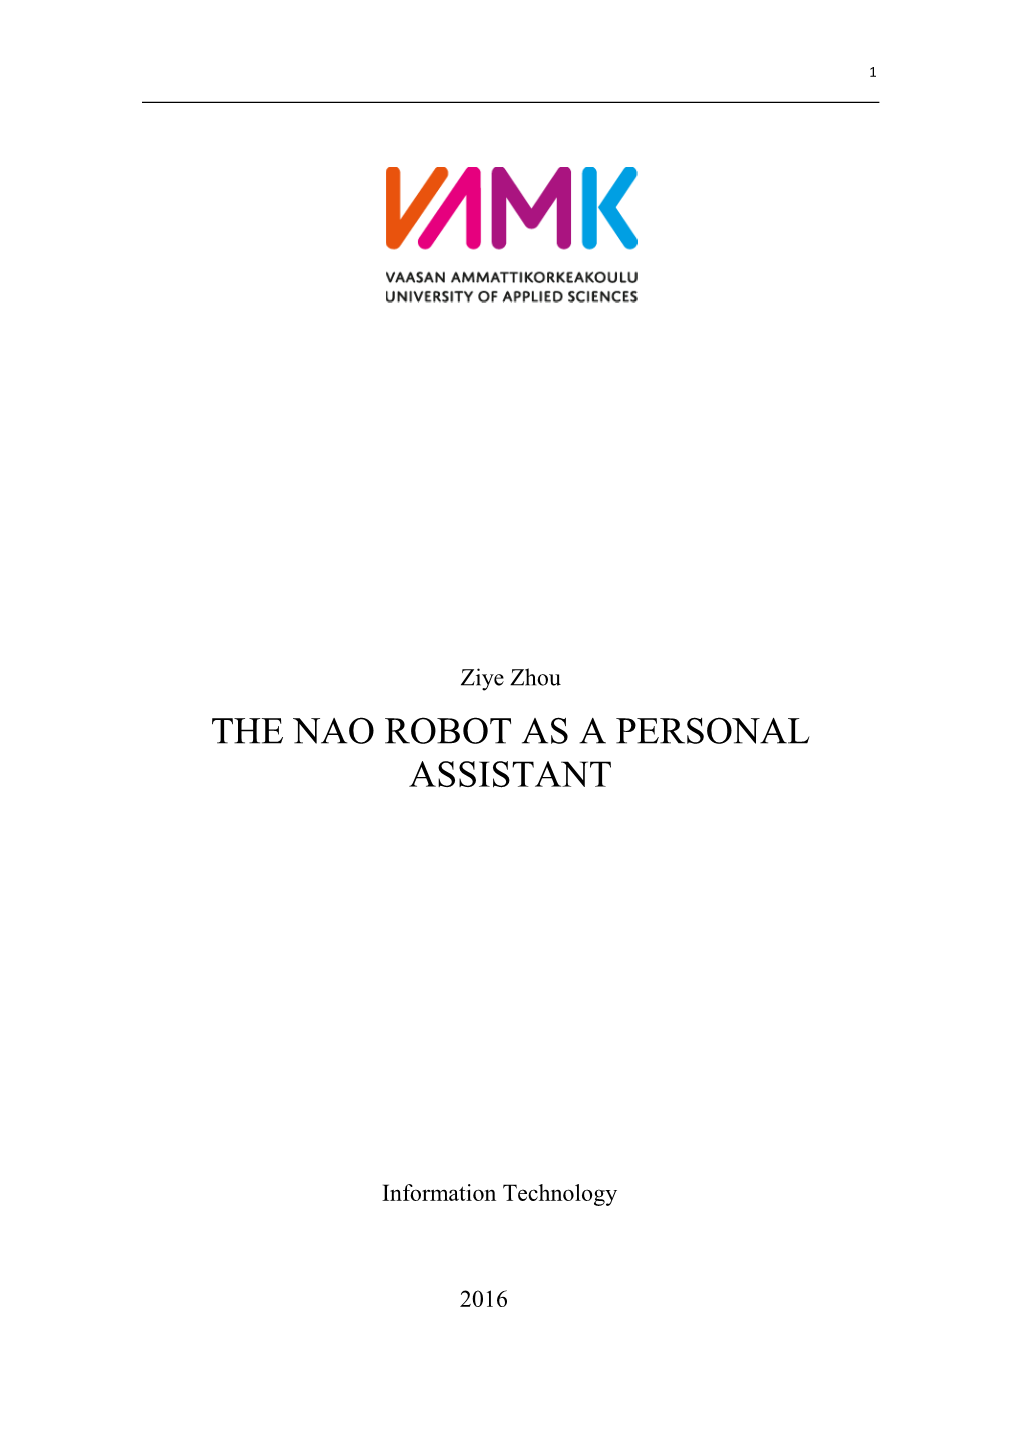 The Nao Robot As a Personal Assistant